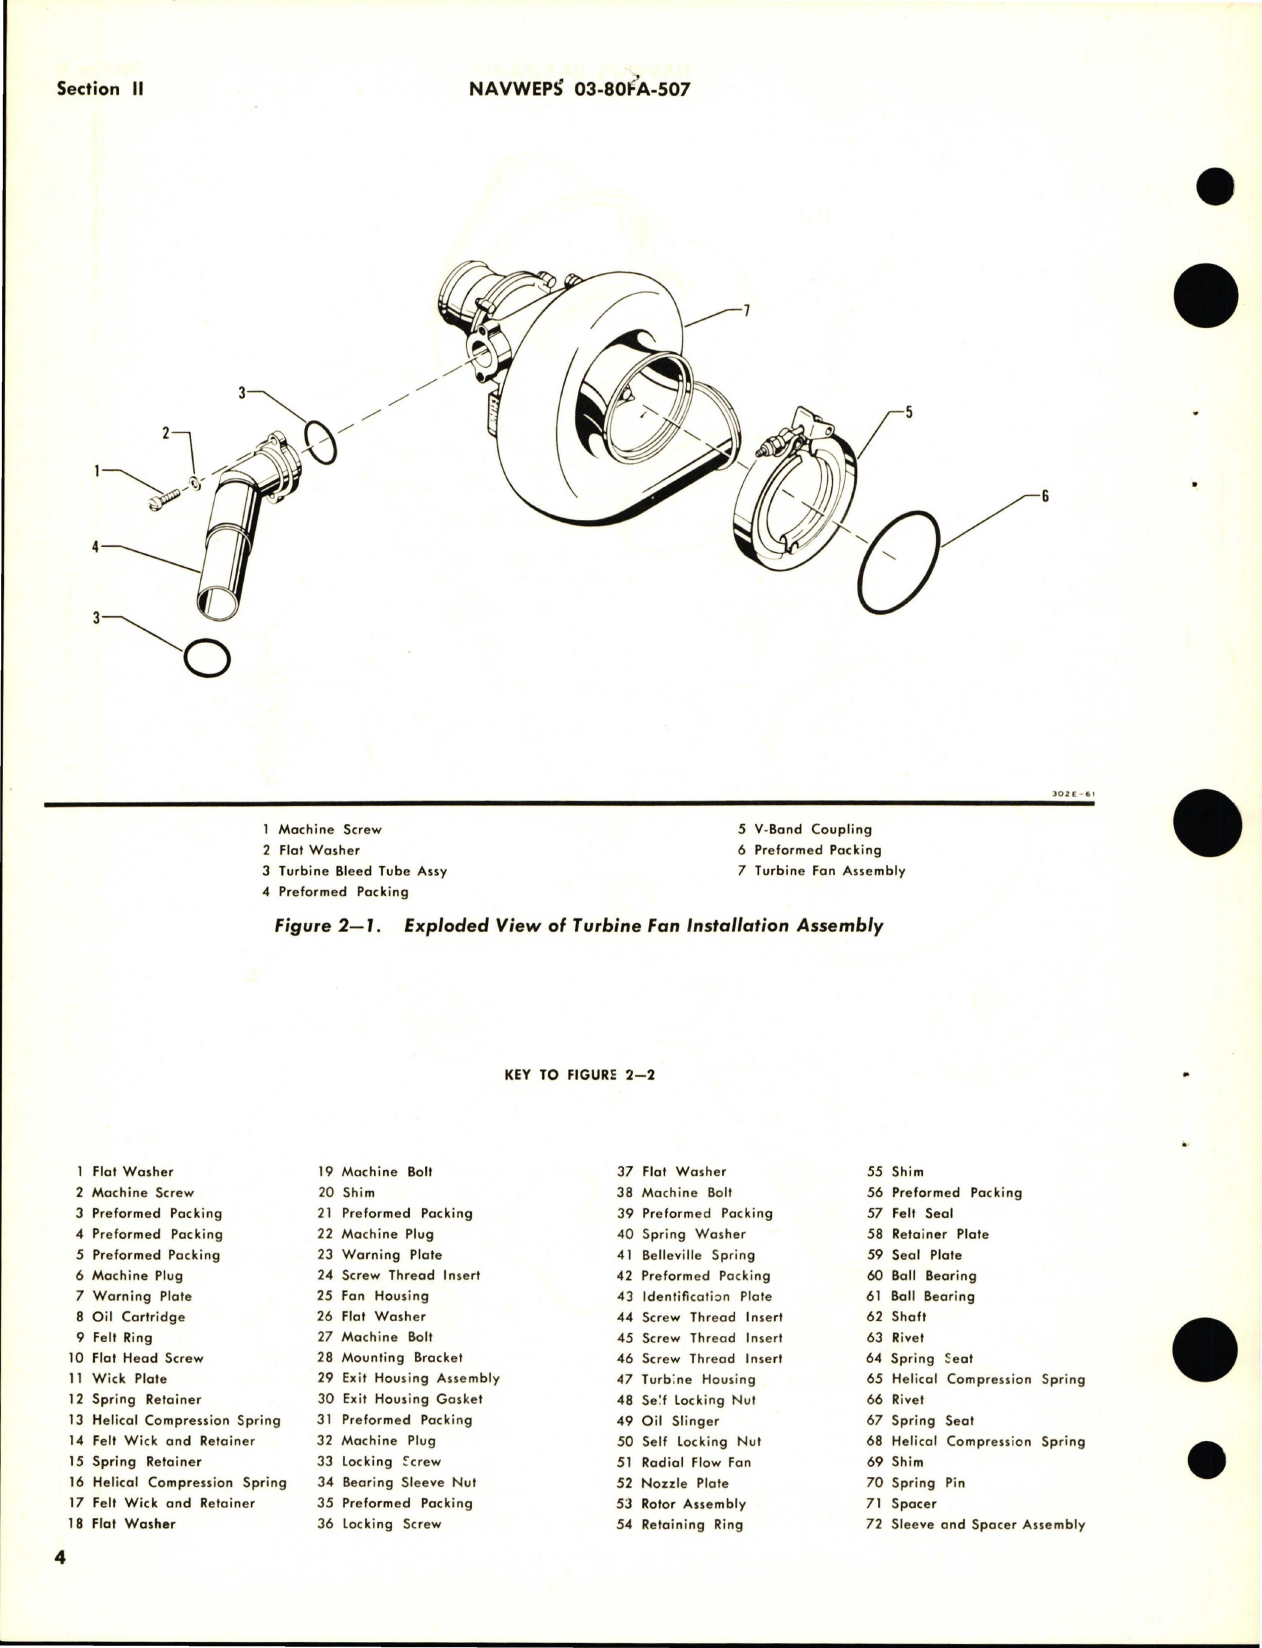 Sample page 8 from AirCorps Library document: Overhaul Instructions for Turbine Fan - Assemblies 519908, 519909, and 536928